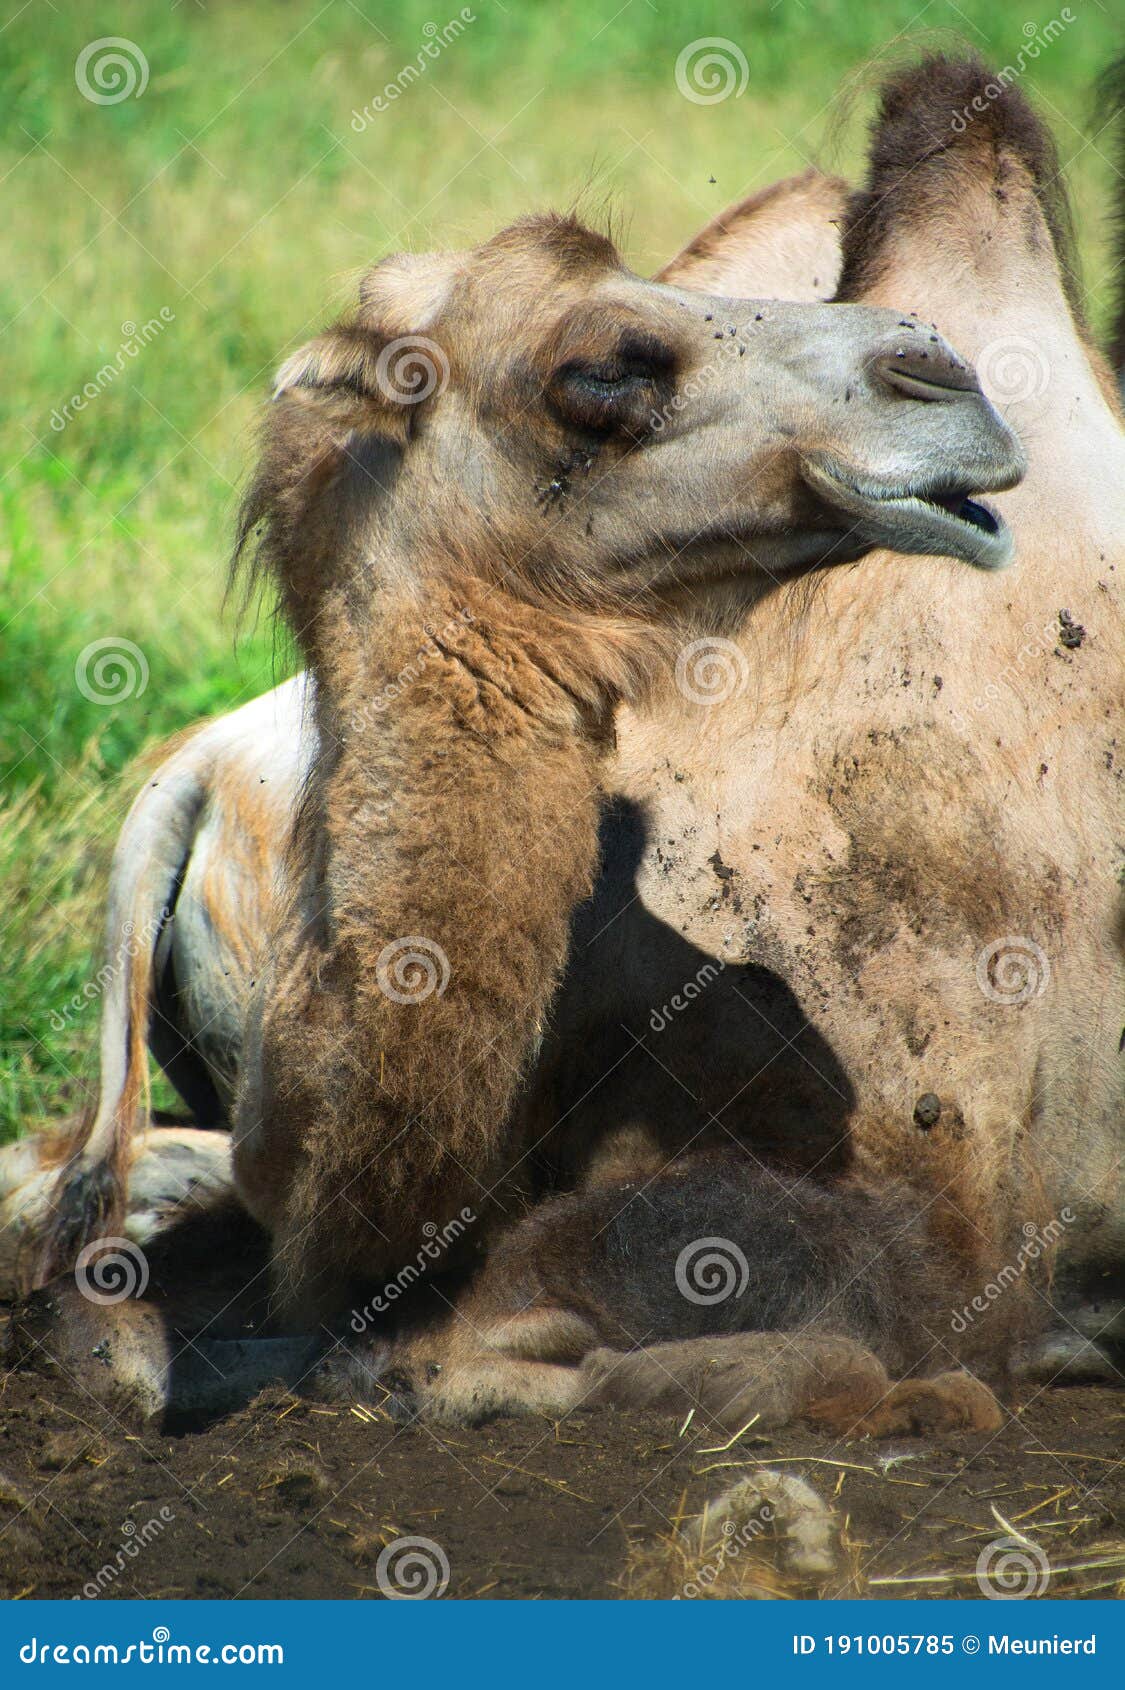 camel is an ungulate within the genus camelus